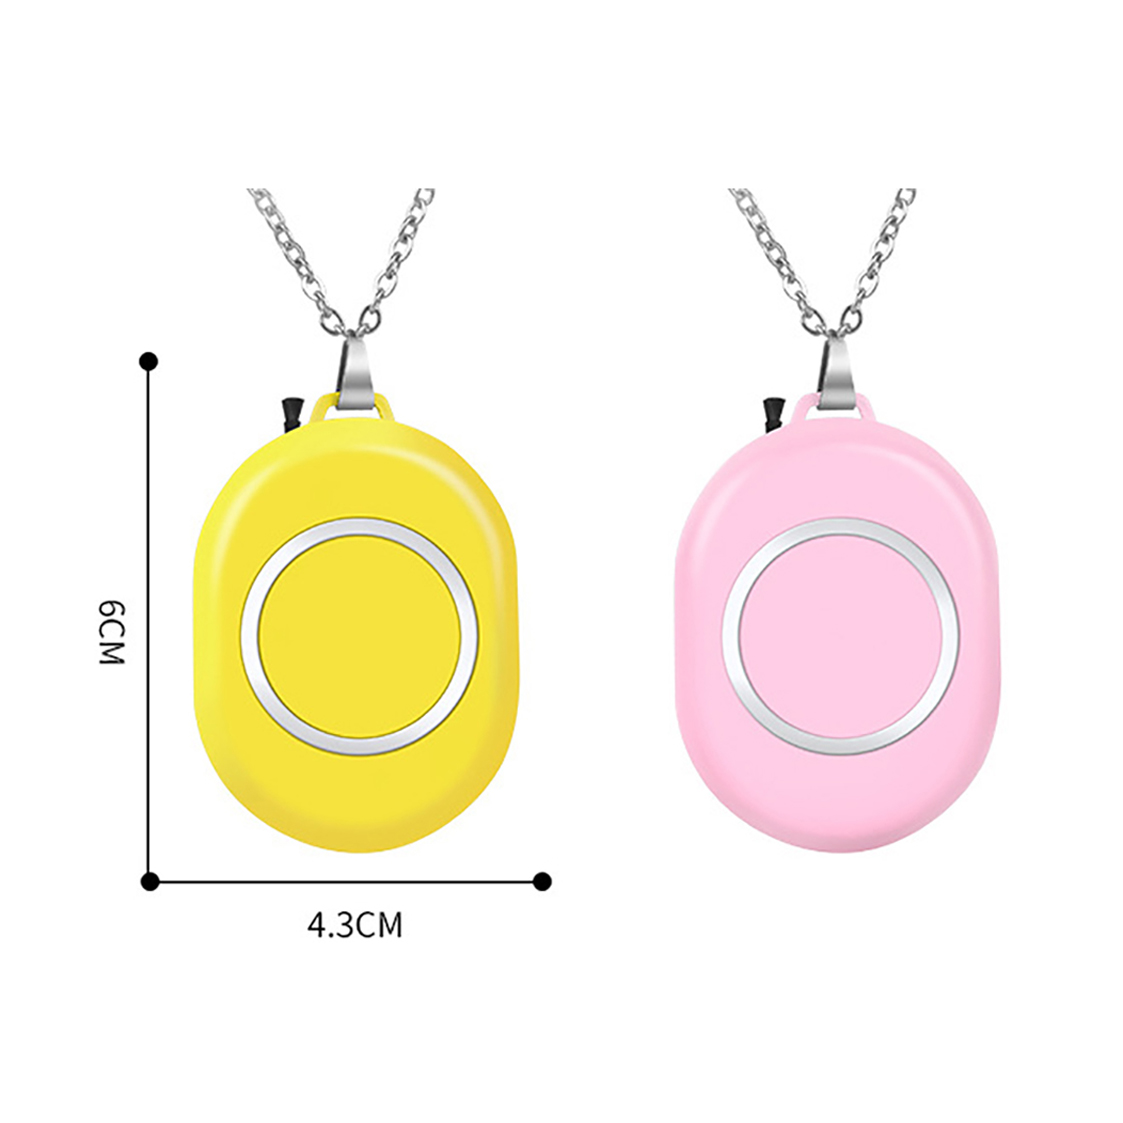 Mini-Portable-Air-Purifier-Negative-Ions-Neck-Hanging-Necklace-Personal-Air-Cleaner-1707470-6